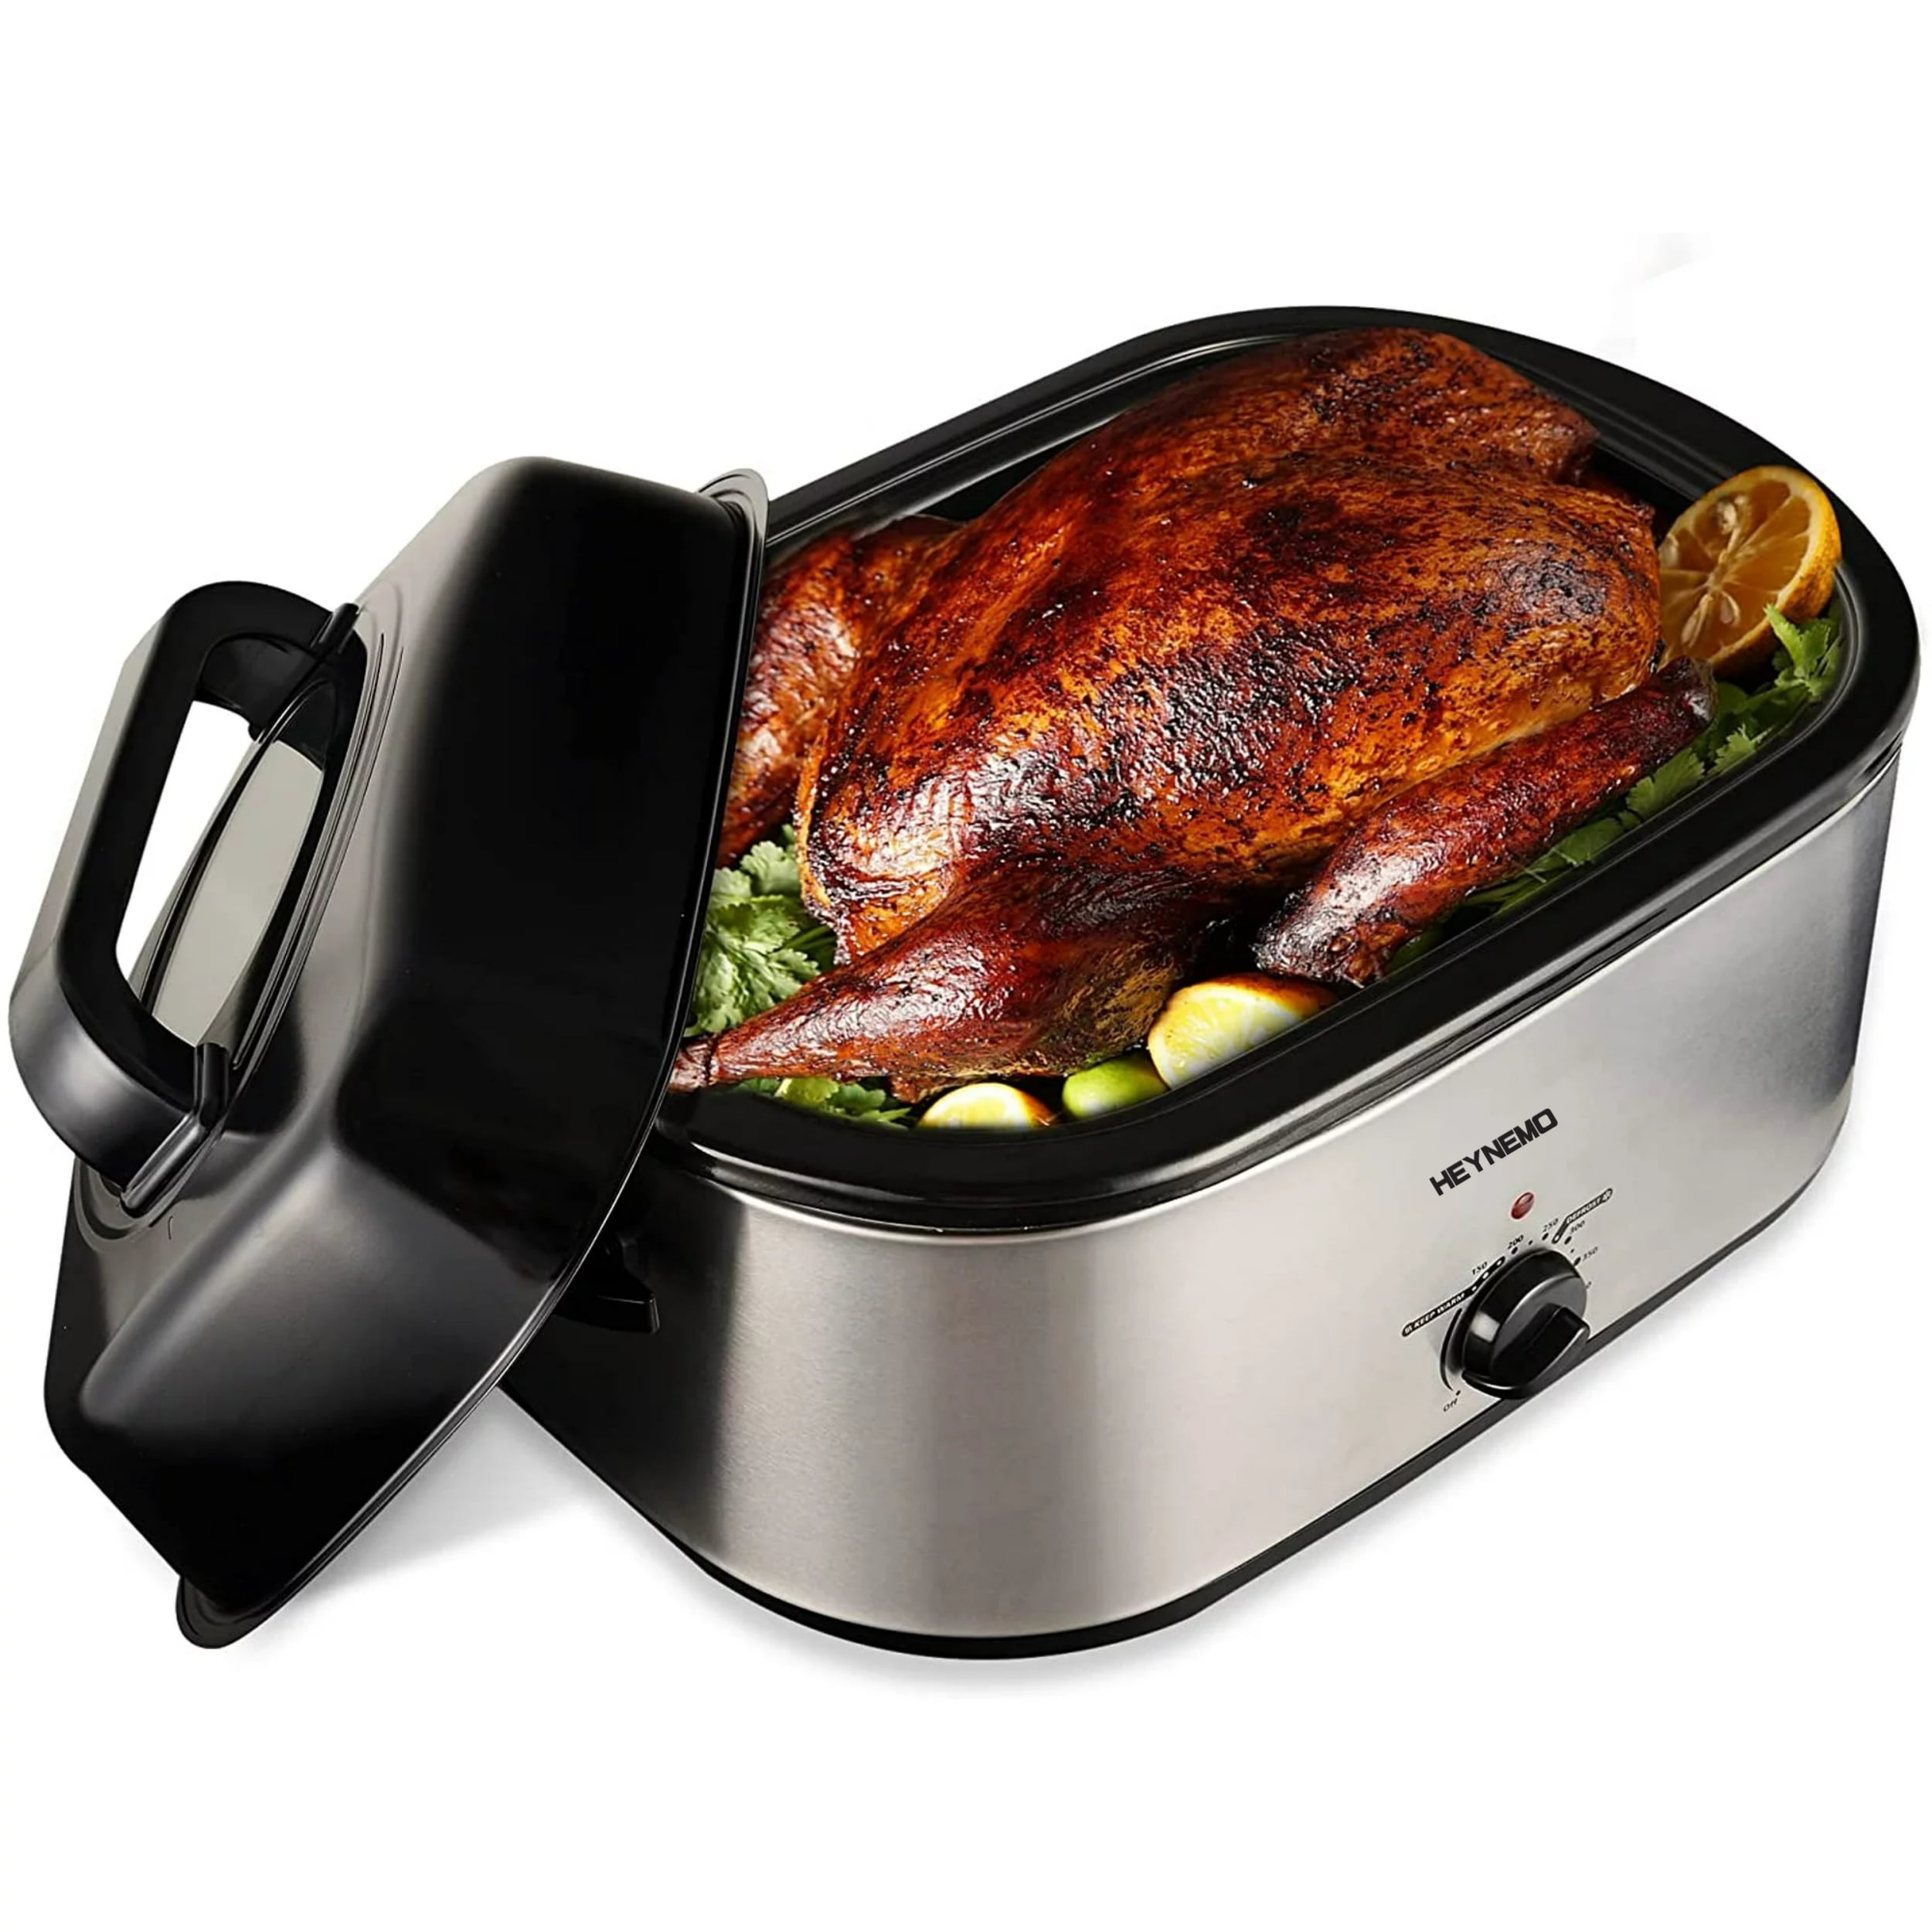 ZOKSUN 1 24 Quart Electric Roaster Oven, Turkey Roaster with Viewing Lid,  Large Stainless Steel Roaster Oven Silver